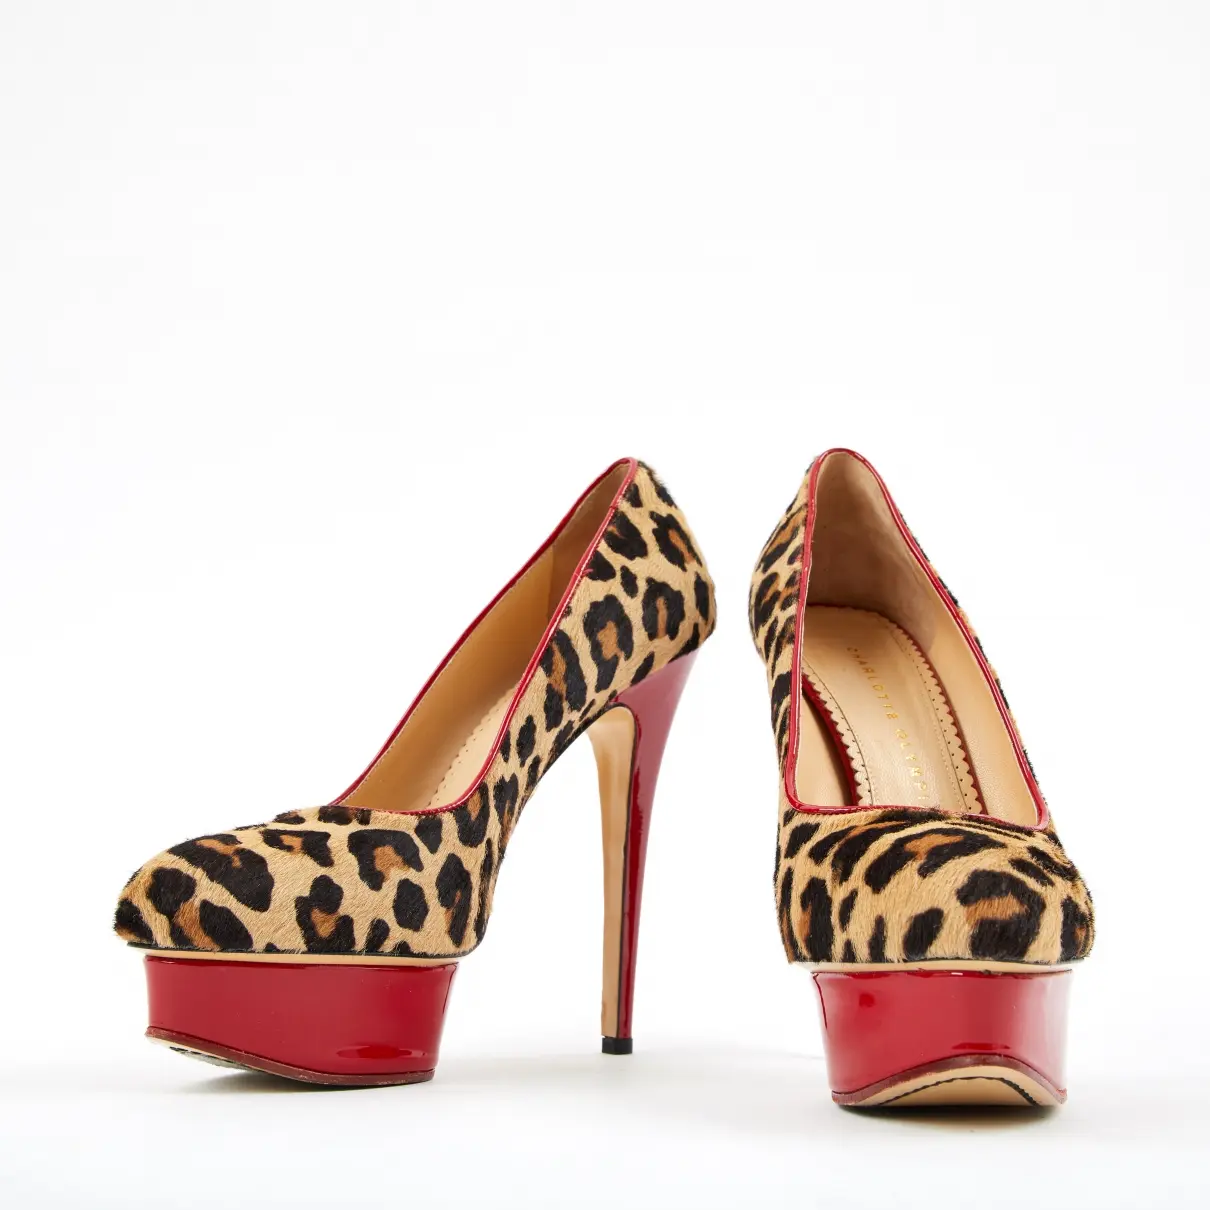 Charlotte Olympia Pony-style calfskin heels for sale